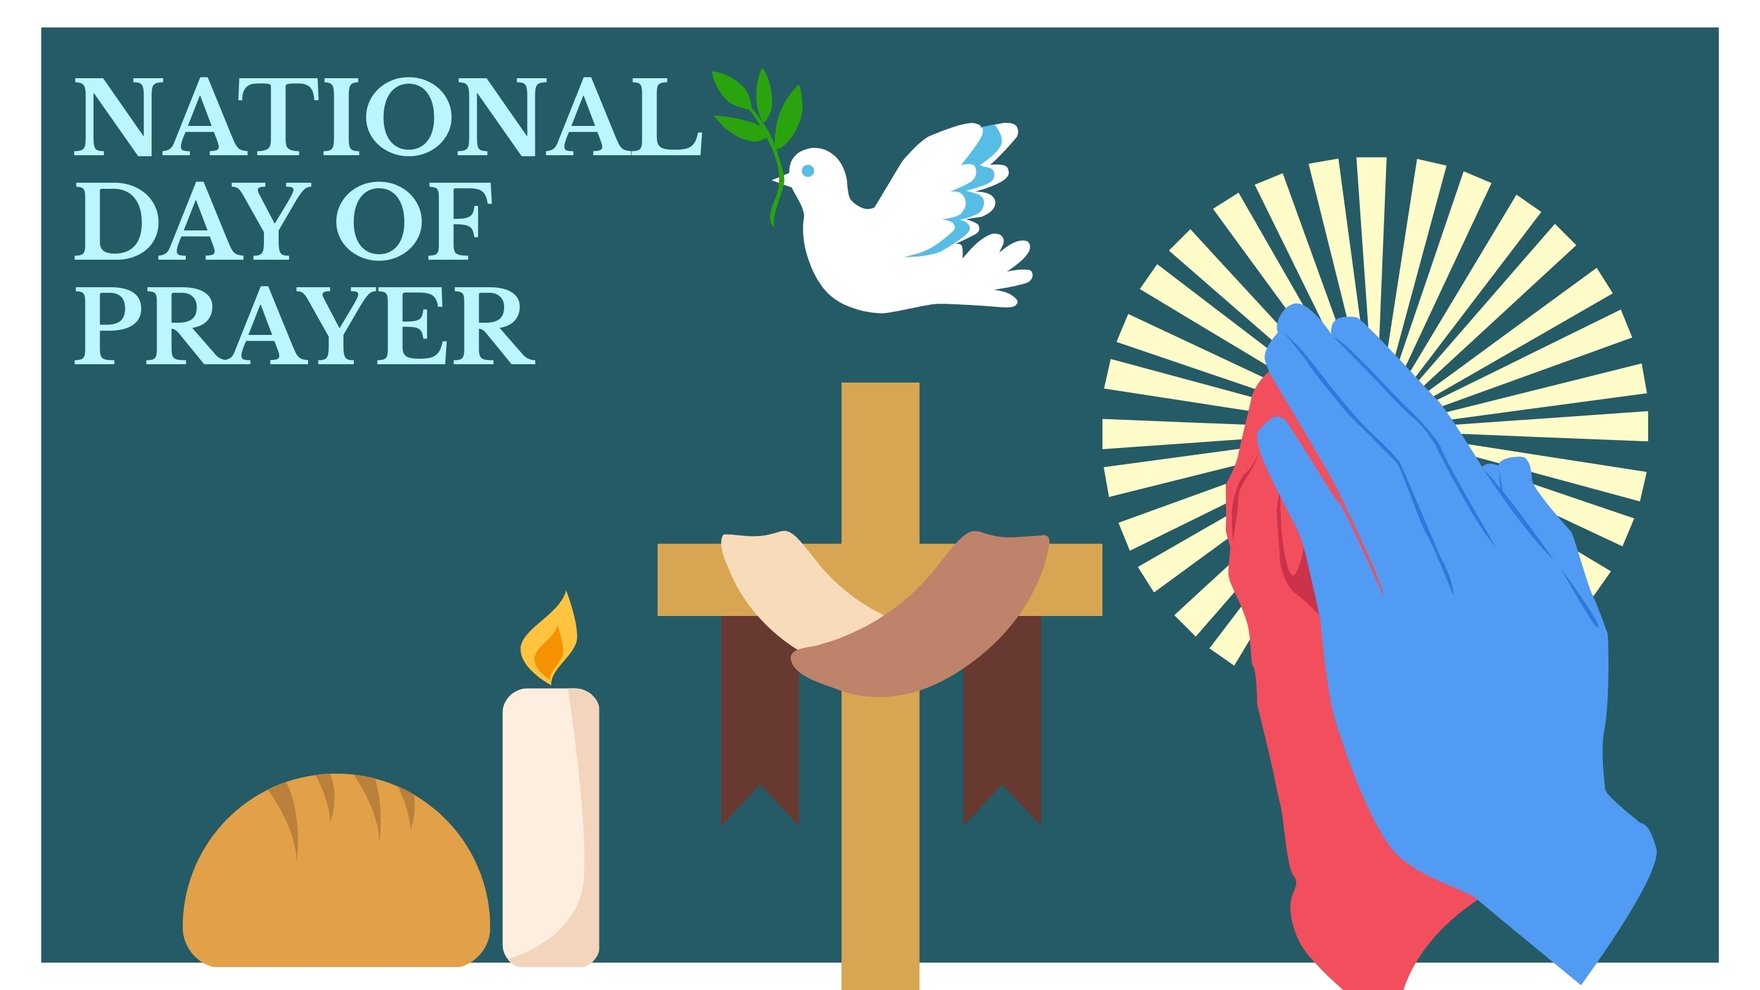 Free National Day of Prayer Drawing Background in PDF, Illustrator, PSD, EPS, SVG, JPG, PNG